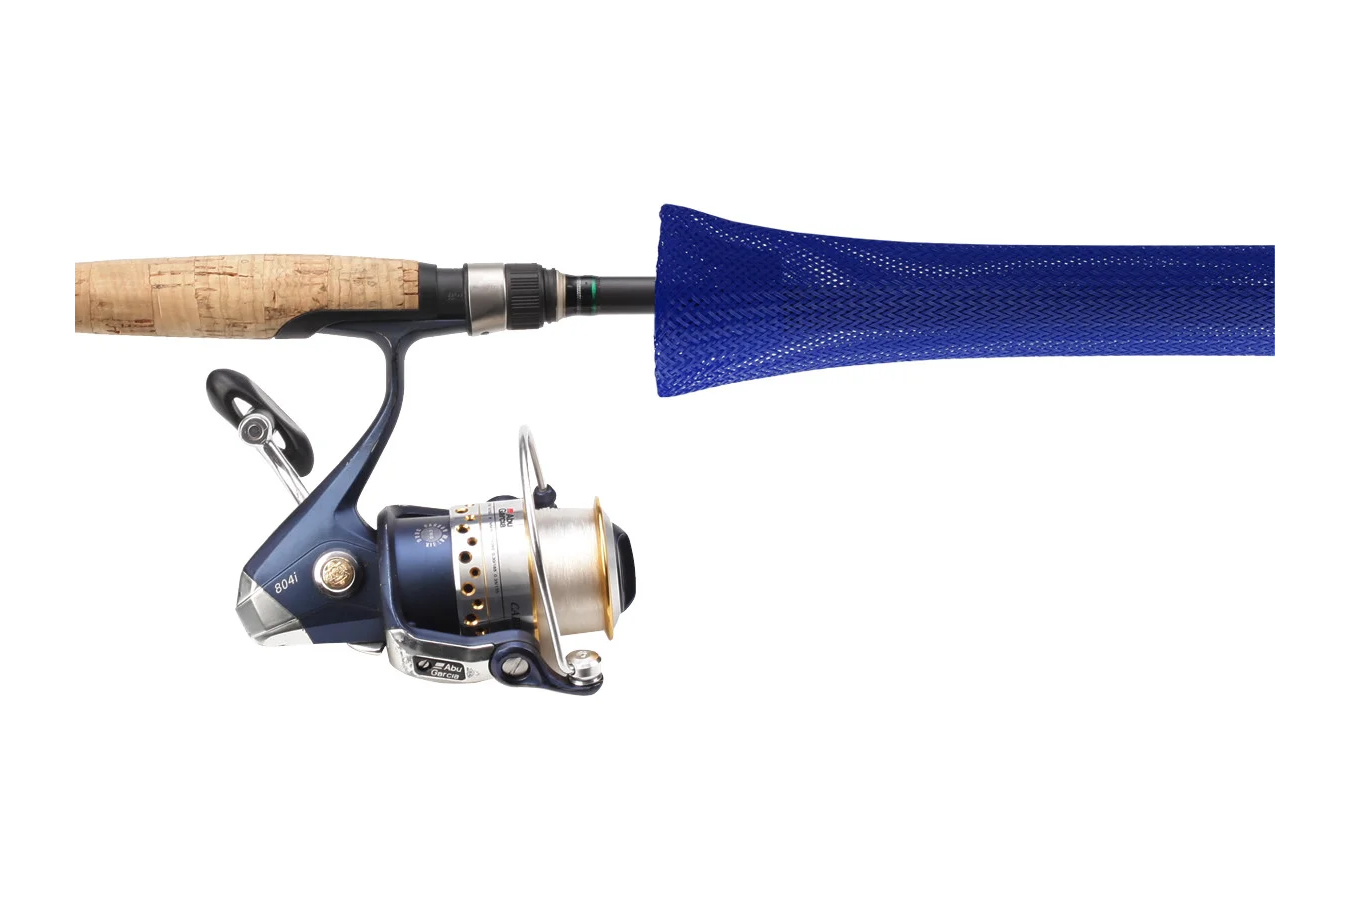 Discount Vrx Fishing Products Rod Glove Spinning Standard- Blue for Sale, Online Fishing Rods Store